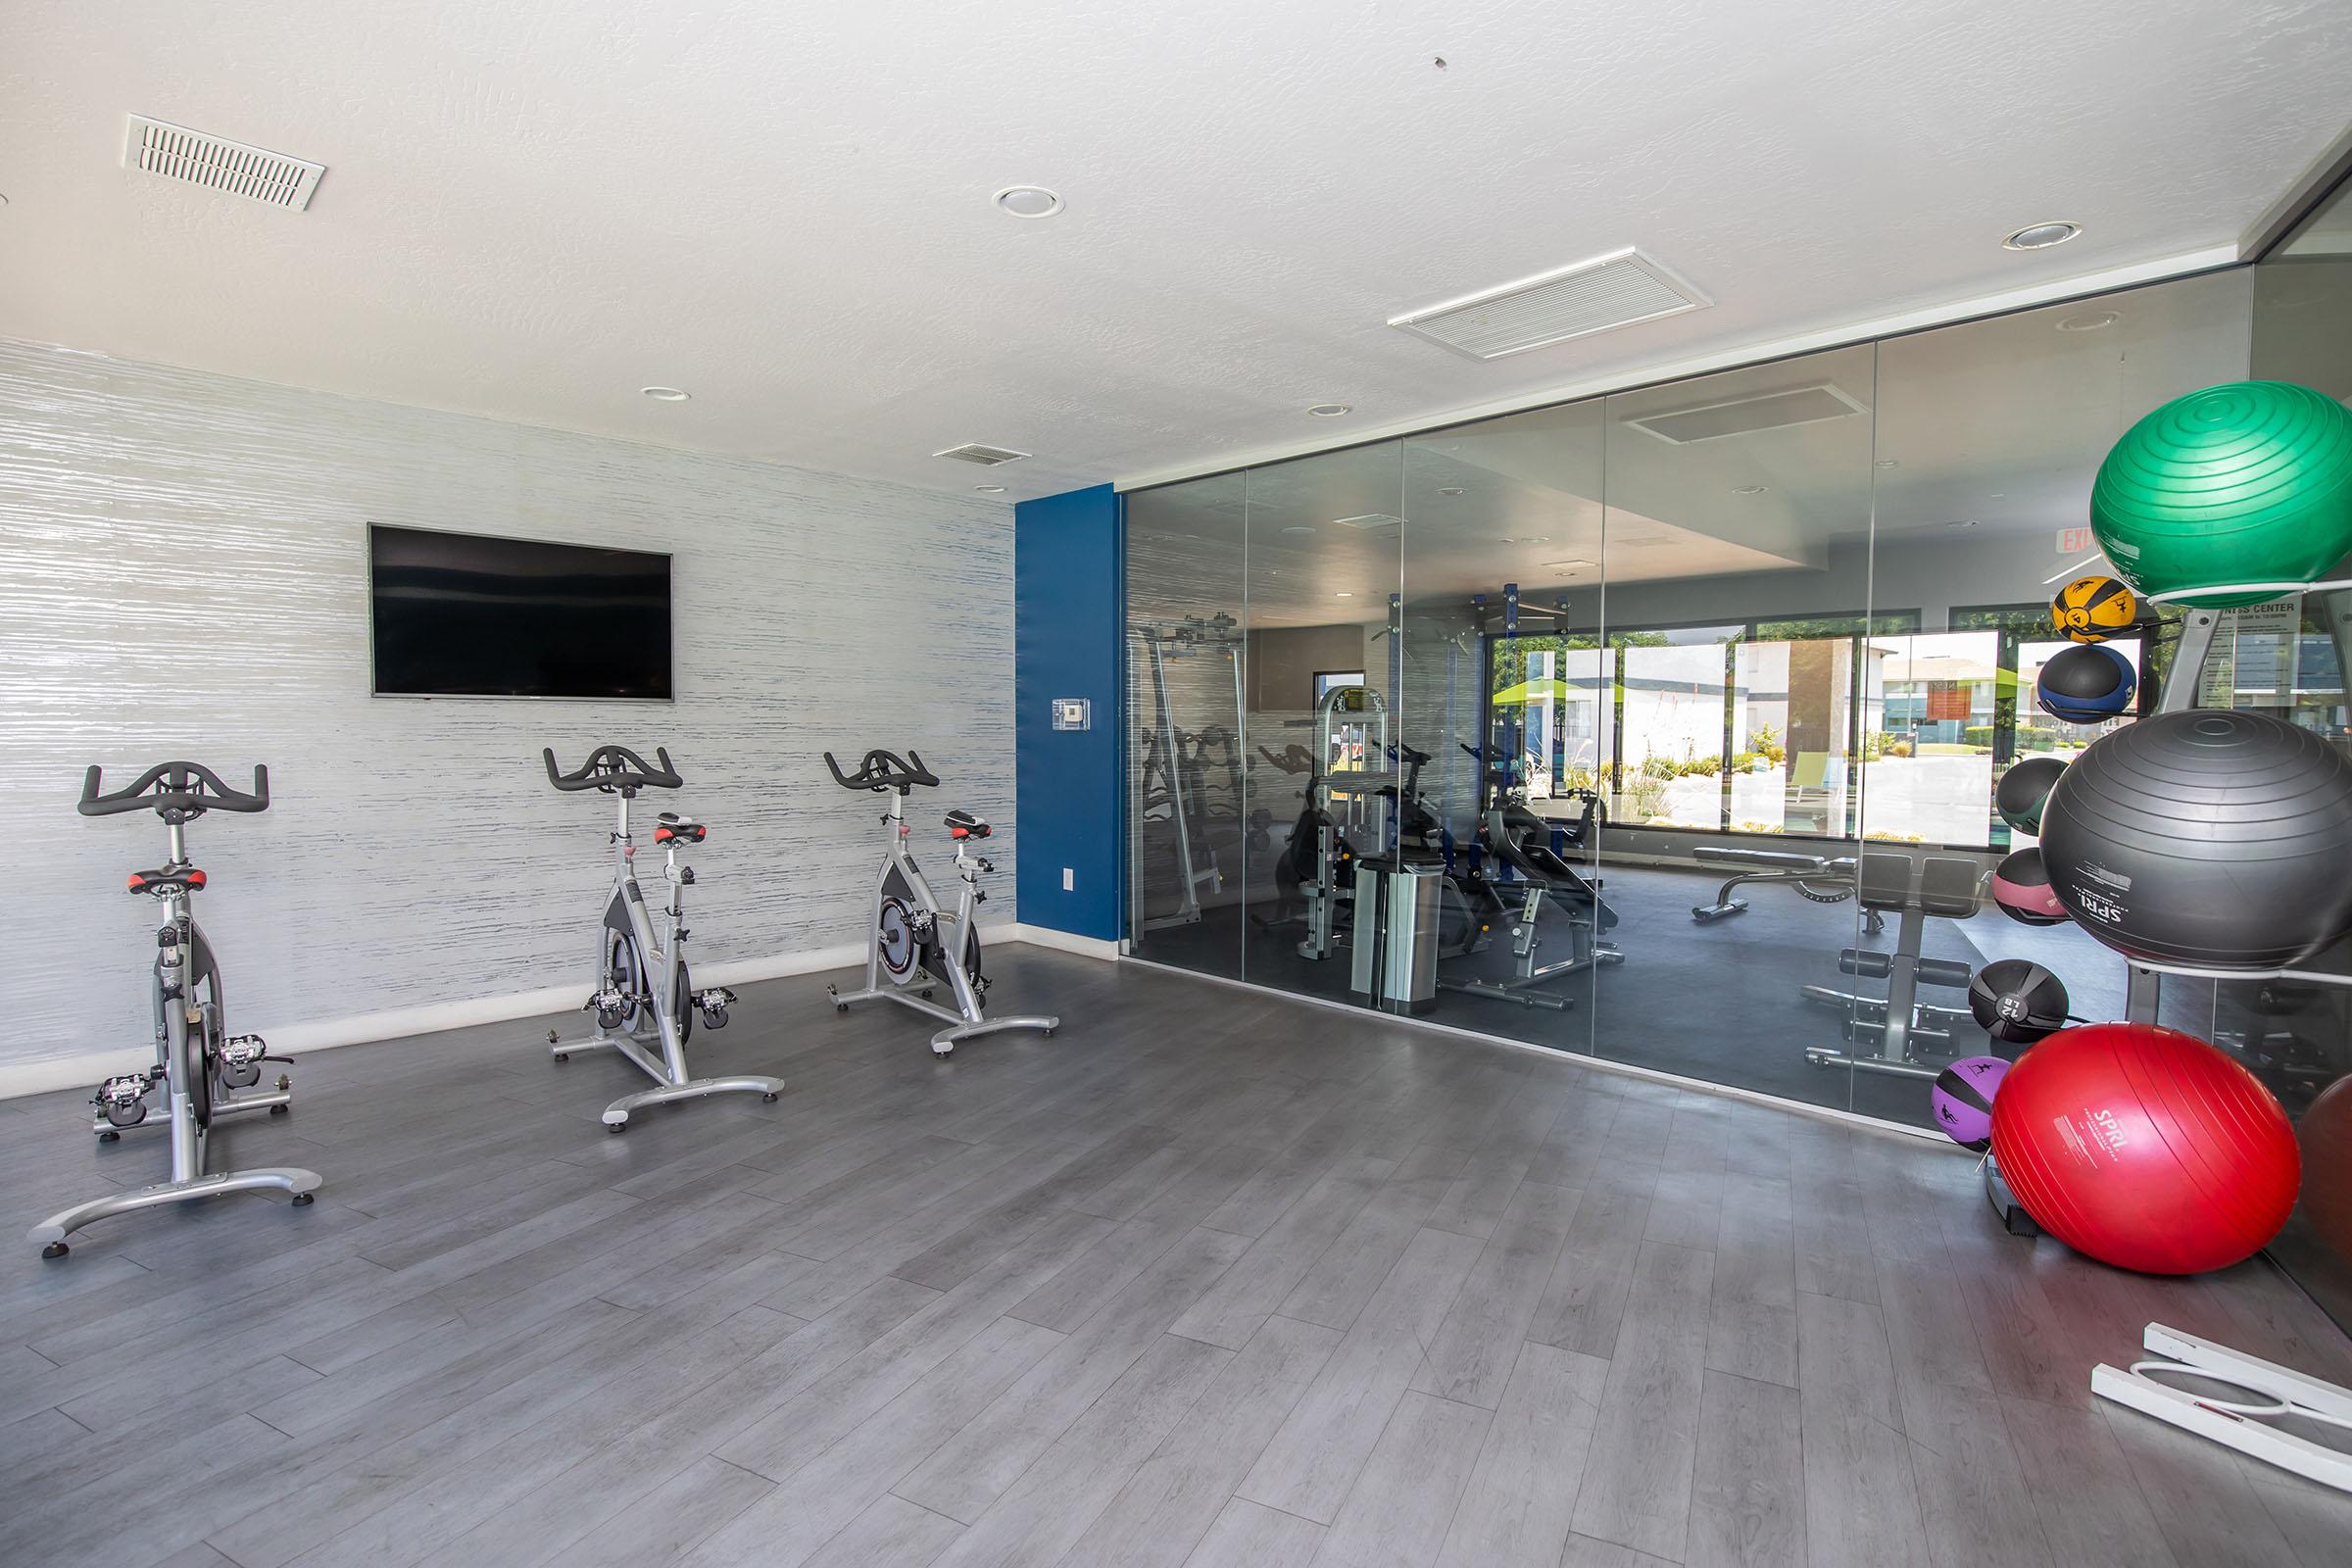 Indoor fitness center with work out balls and bikes facing a wall of mirrors and a flat screen TV